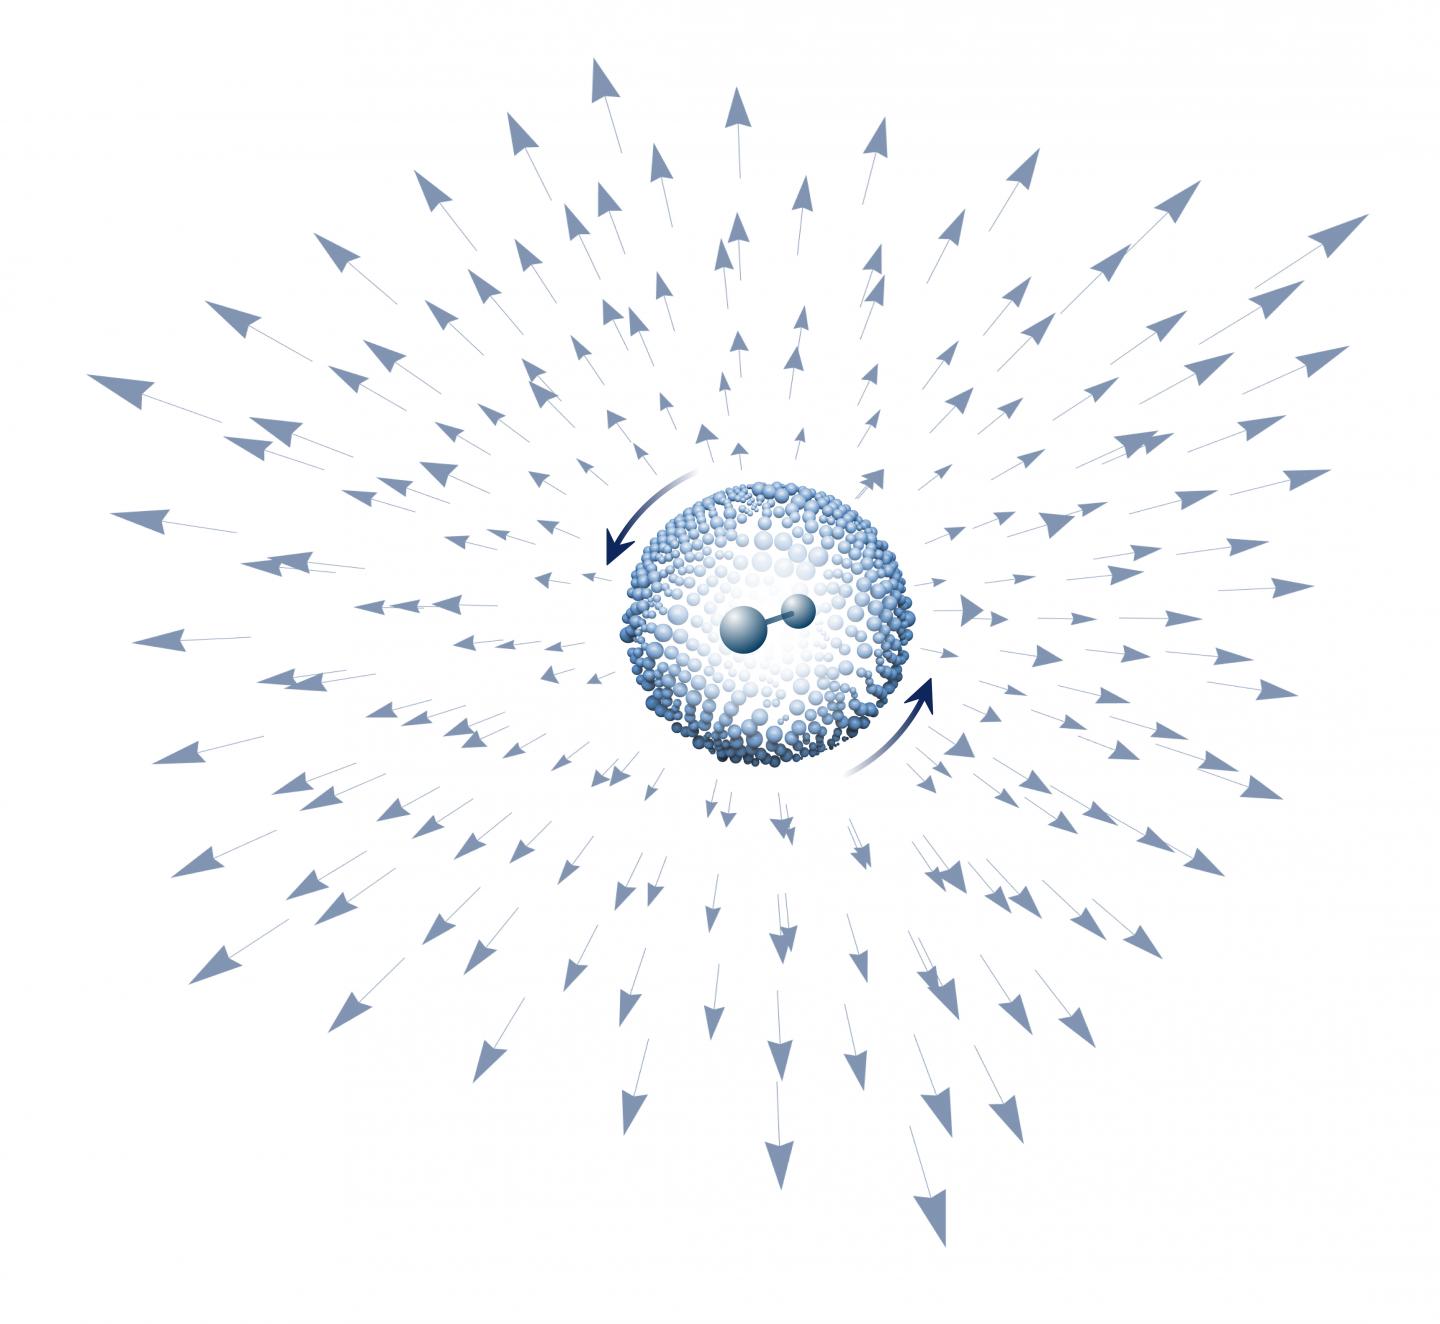 A Superfluid Helium Droplet Acts as a Magnetic Monopole